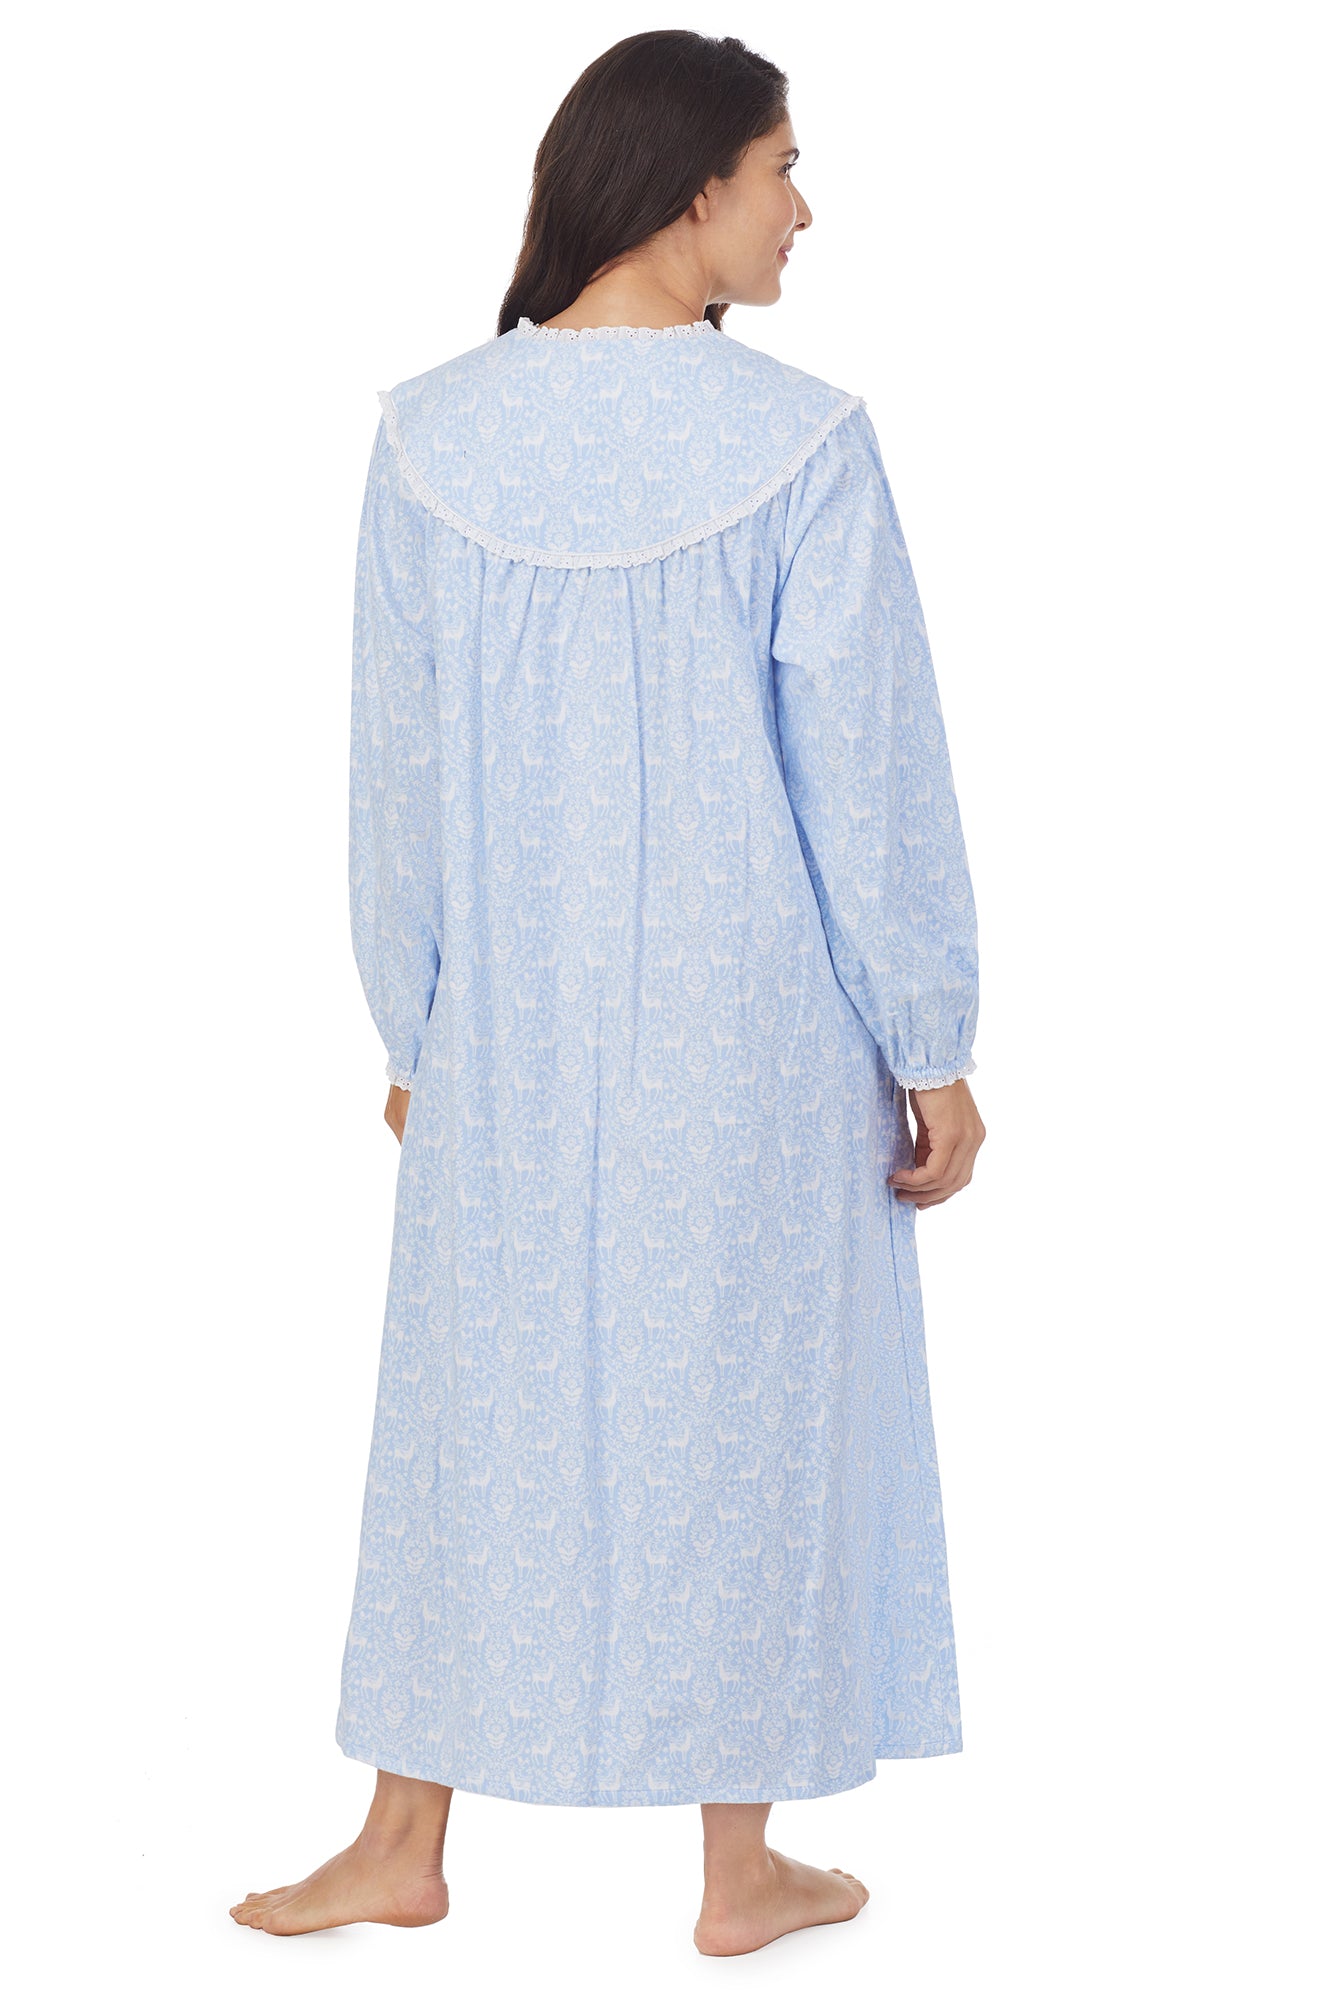 A lady wearing blue flannel gown with white design